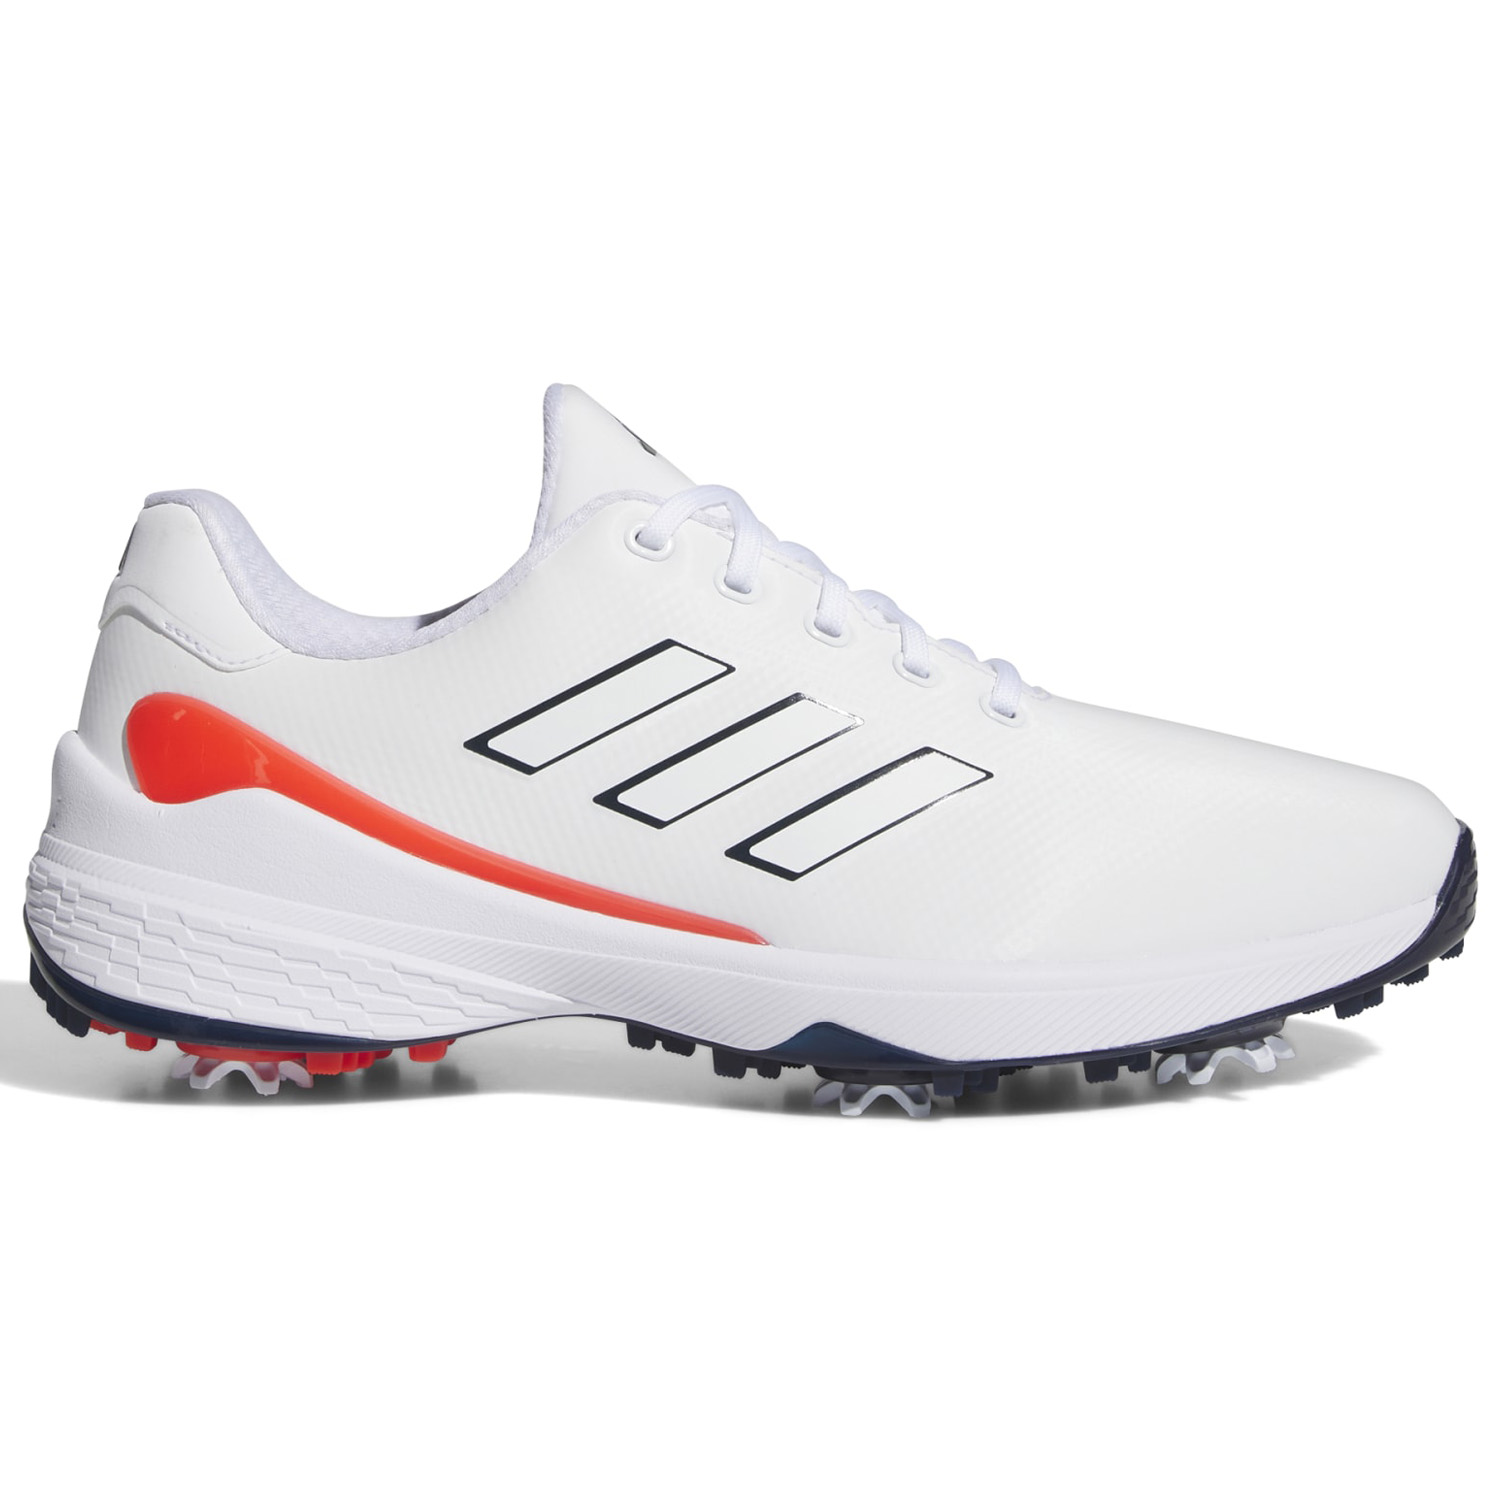 adidas ZG23 Mens Waterproof Lightweight Golf Shoes  - Cloud White/Collegiate Navy/Bright Red